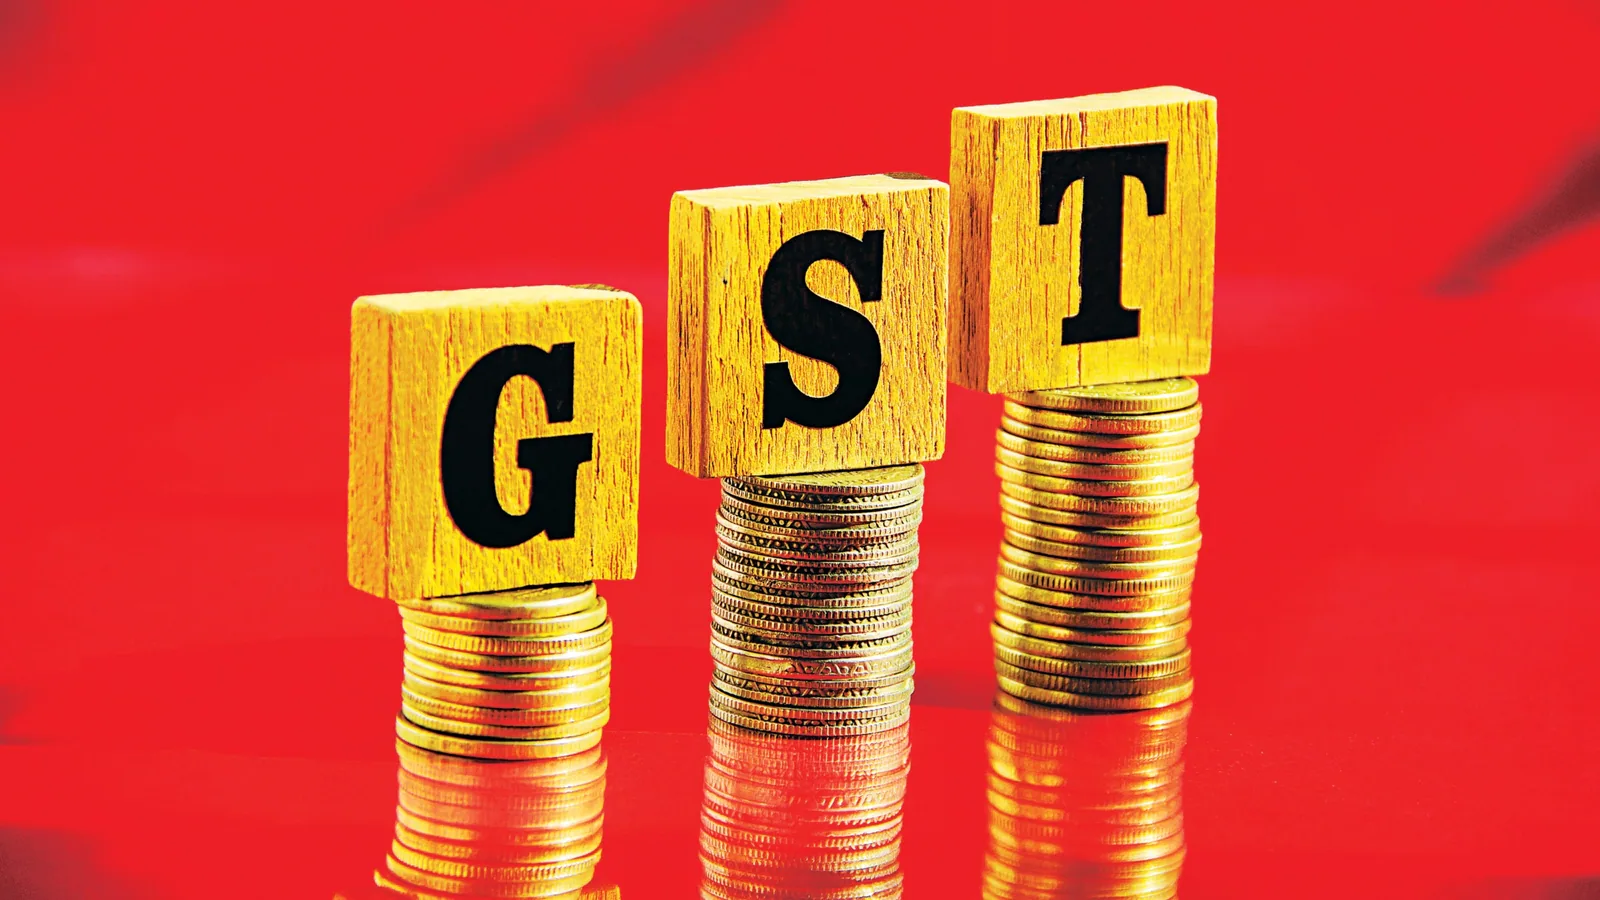 GST collections up 26% to over ₹1.47 lakh crore in September